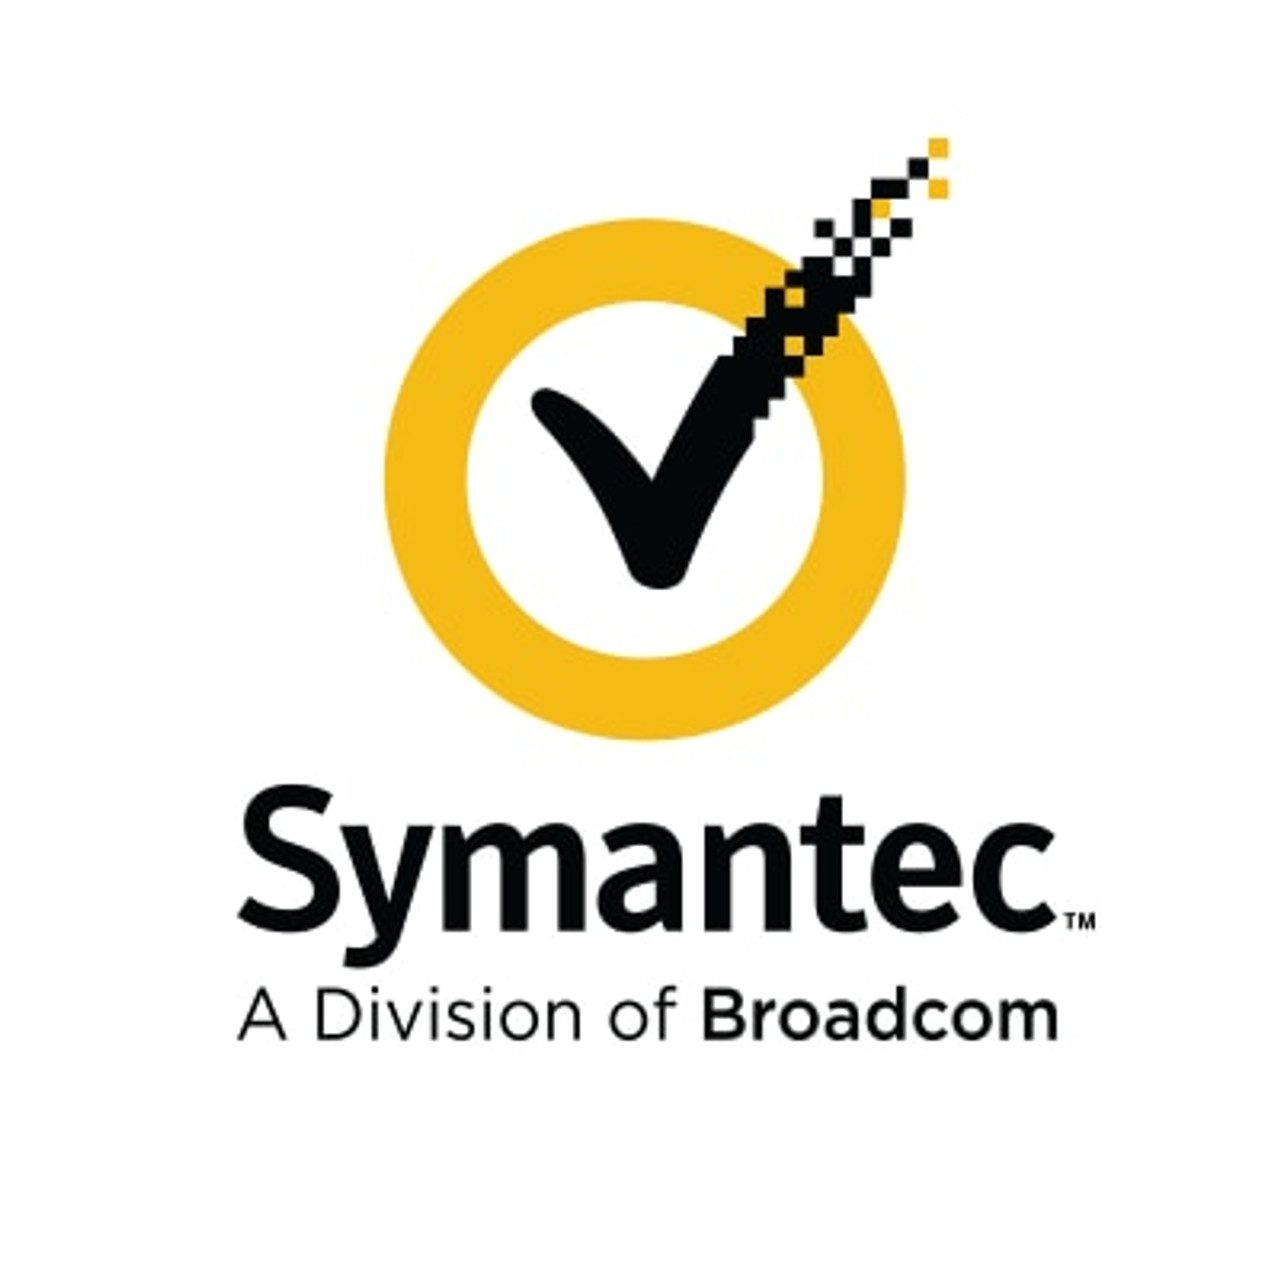 Symantec CloudSOC CASB Reverse Proxy For SaaS - E40 Add-On, Initial Cloud Service Subscription with Support, 500,000-999,999 Users, 3 YR